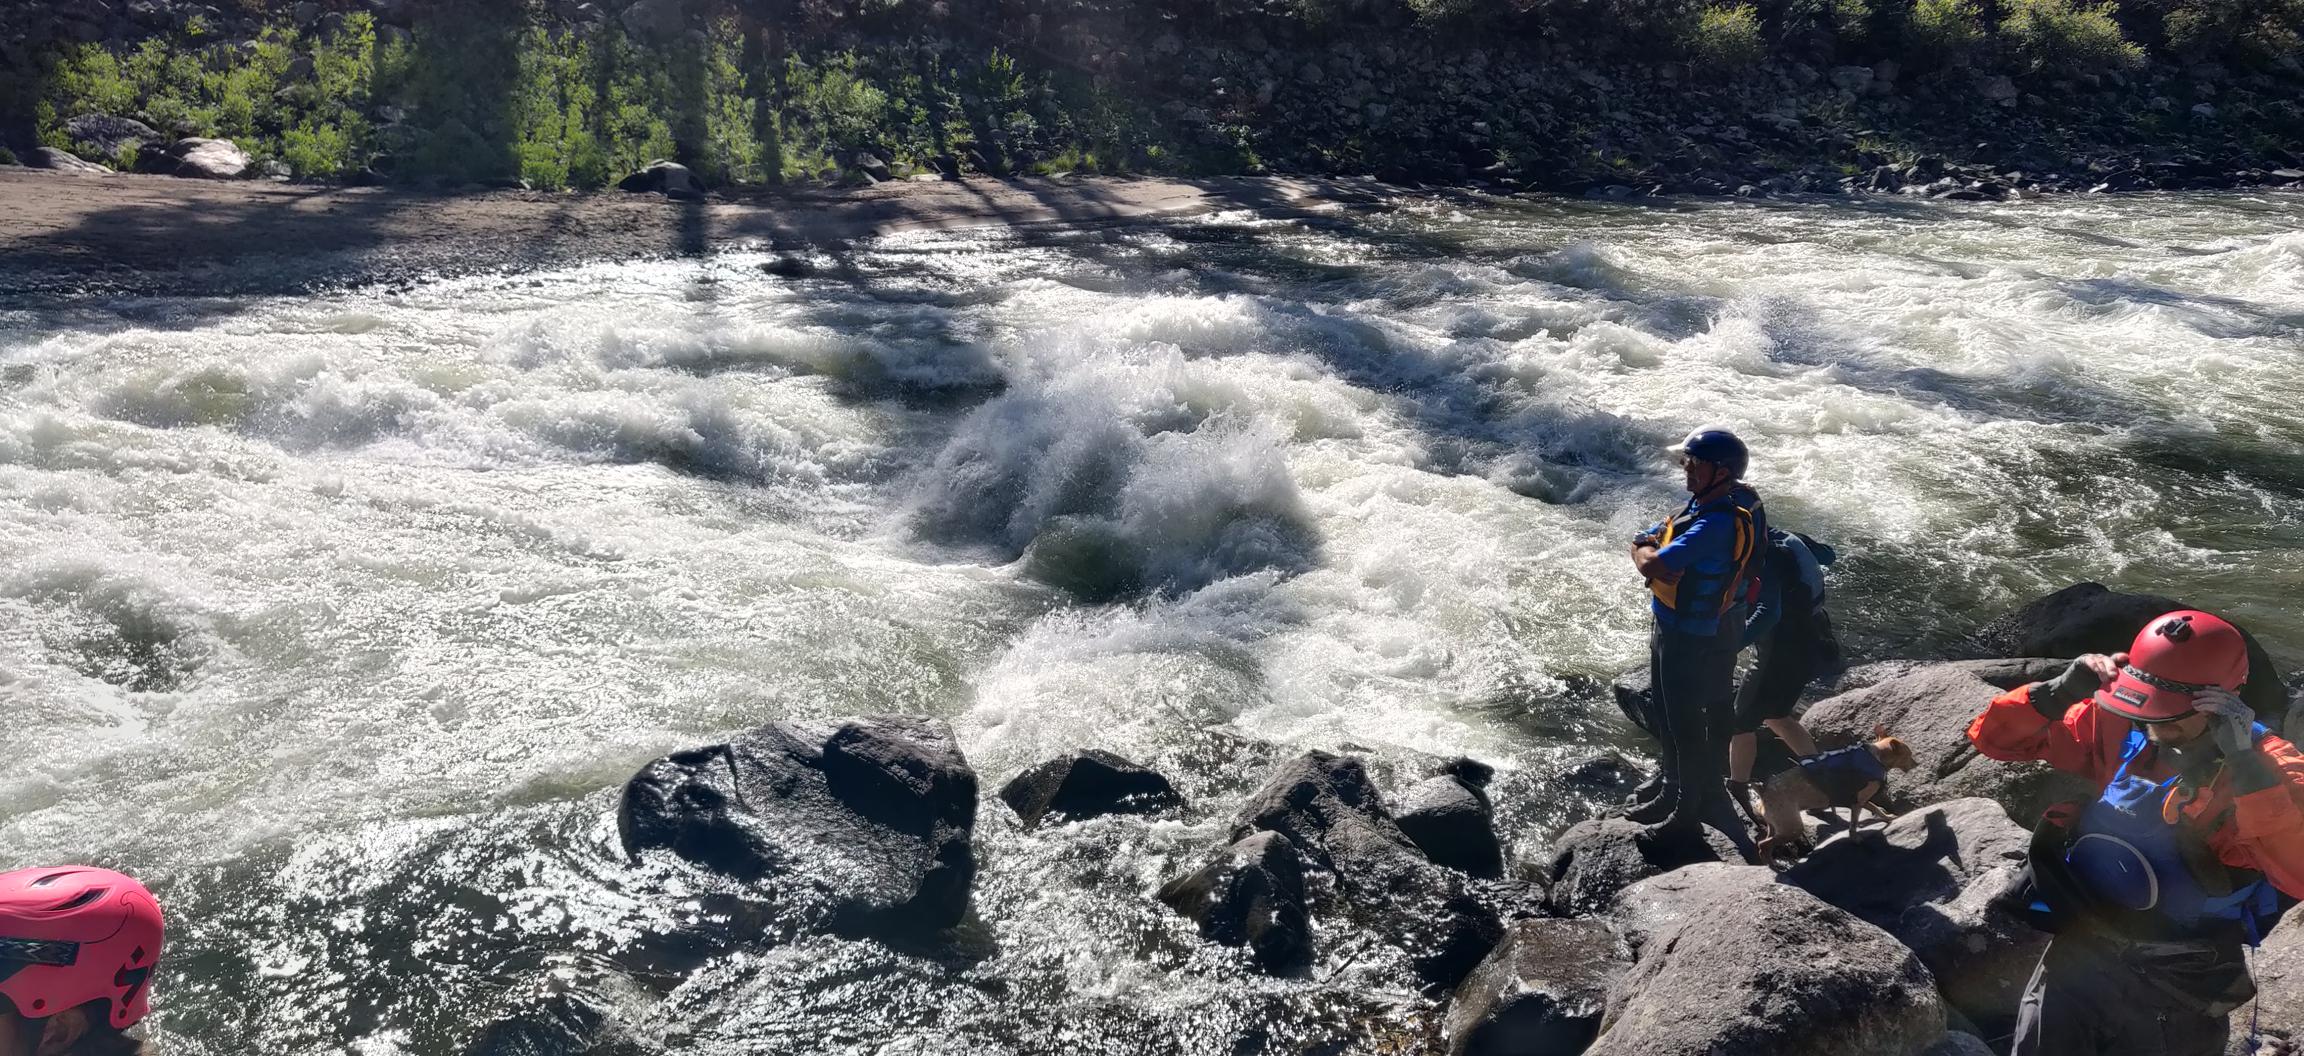 New rapid on the Main Salmon - Sapp Creek was probably the crux of the run at this flow